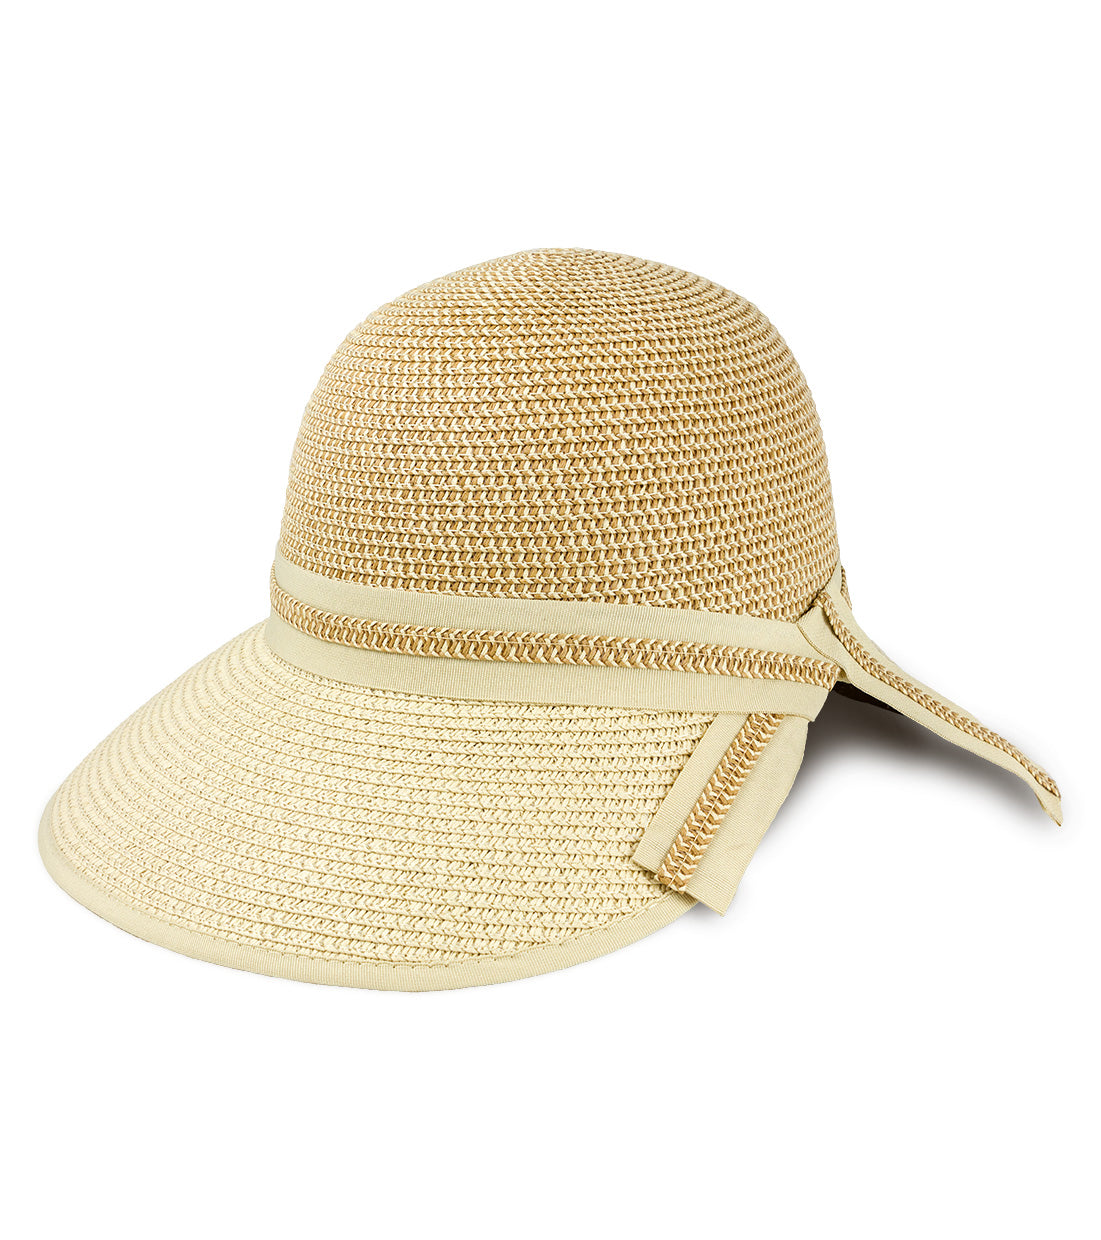 Magid Two-Toned Straw Garden Hat Braided Crown